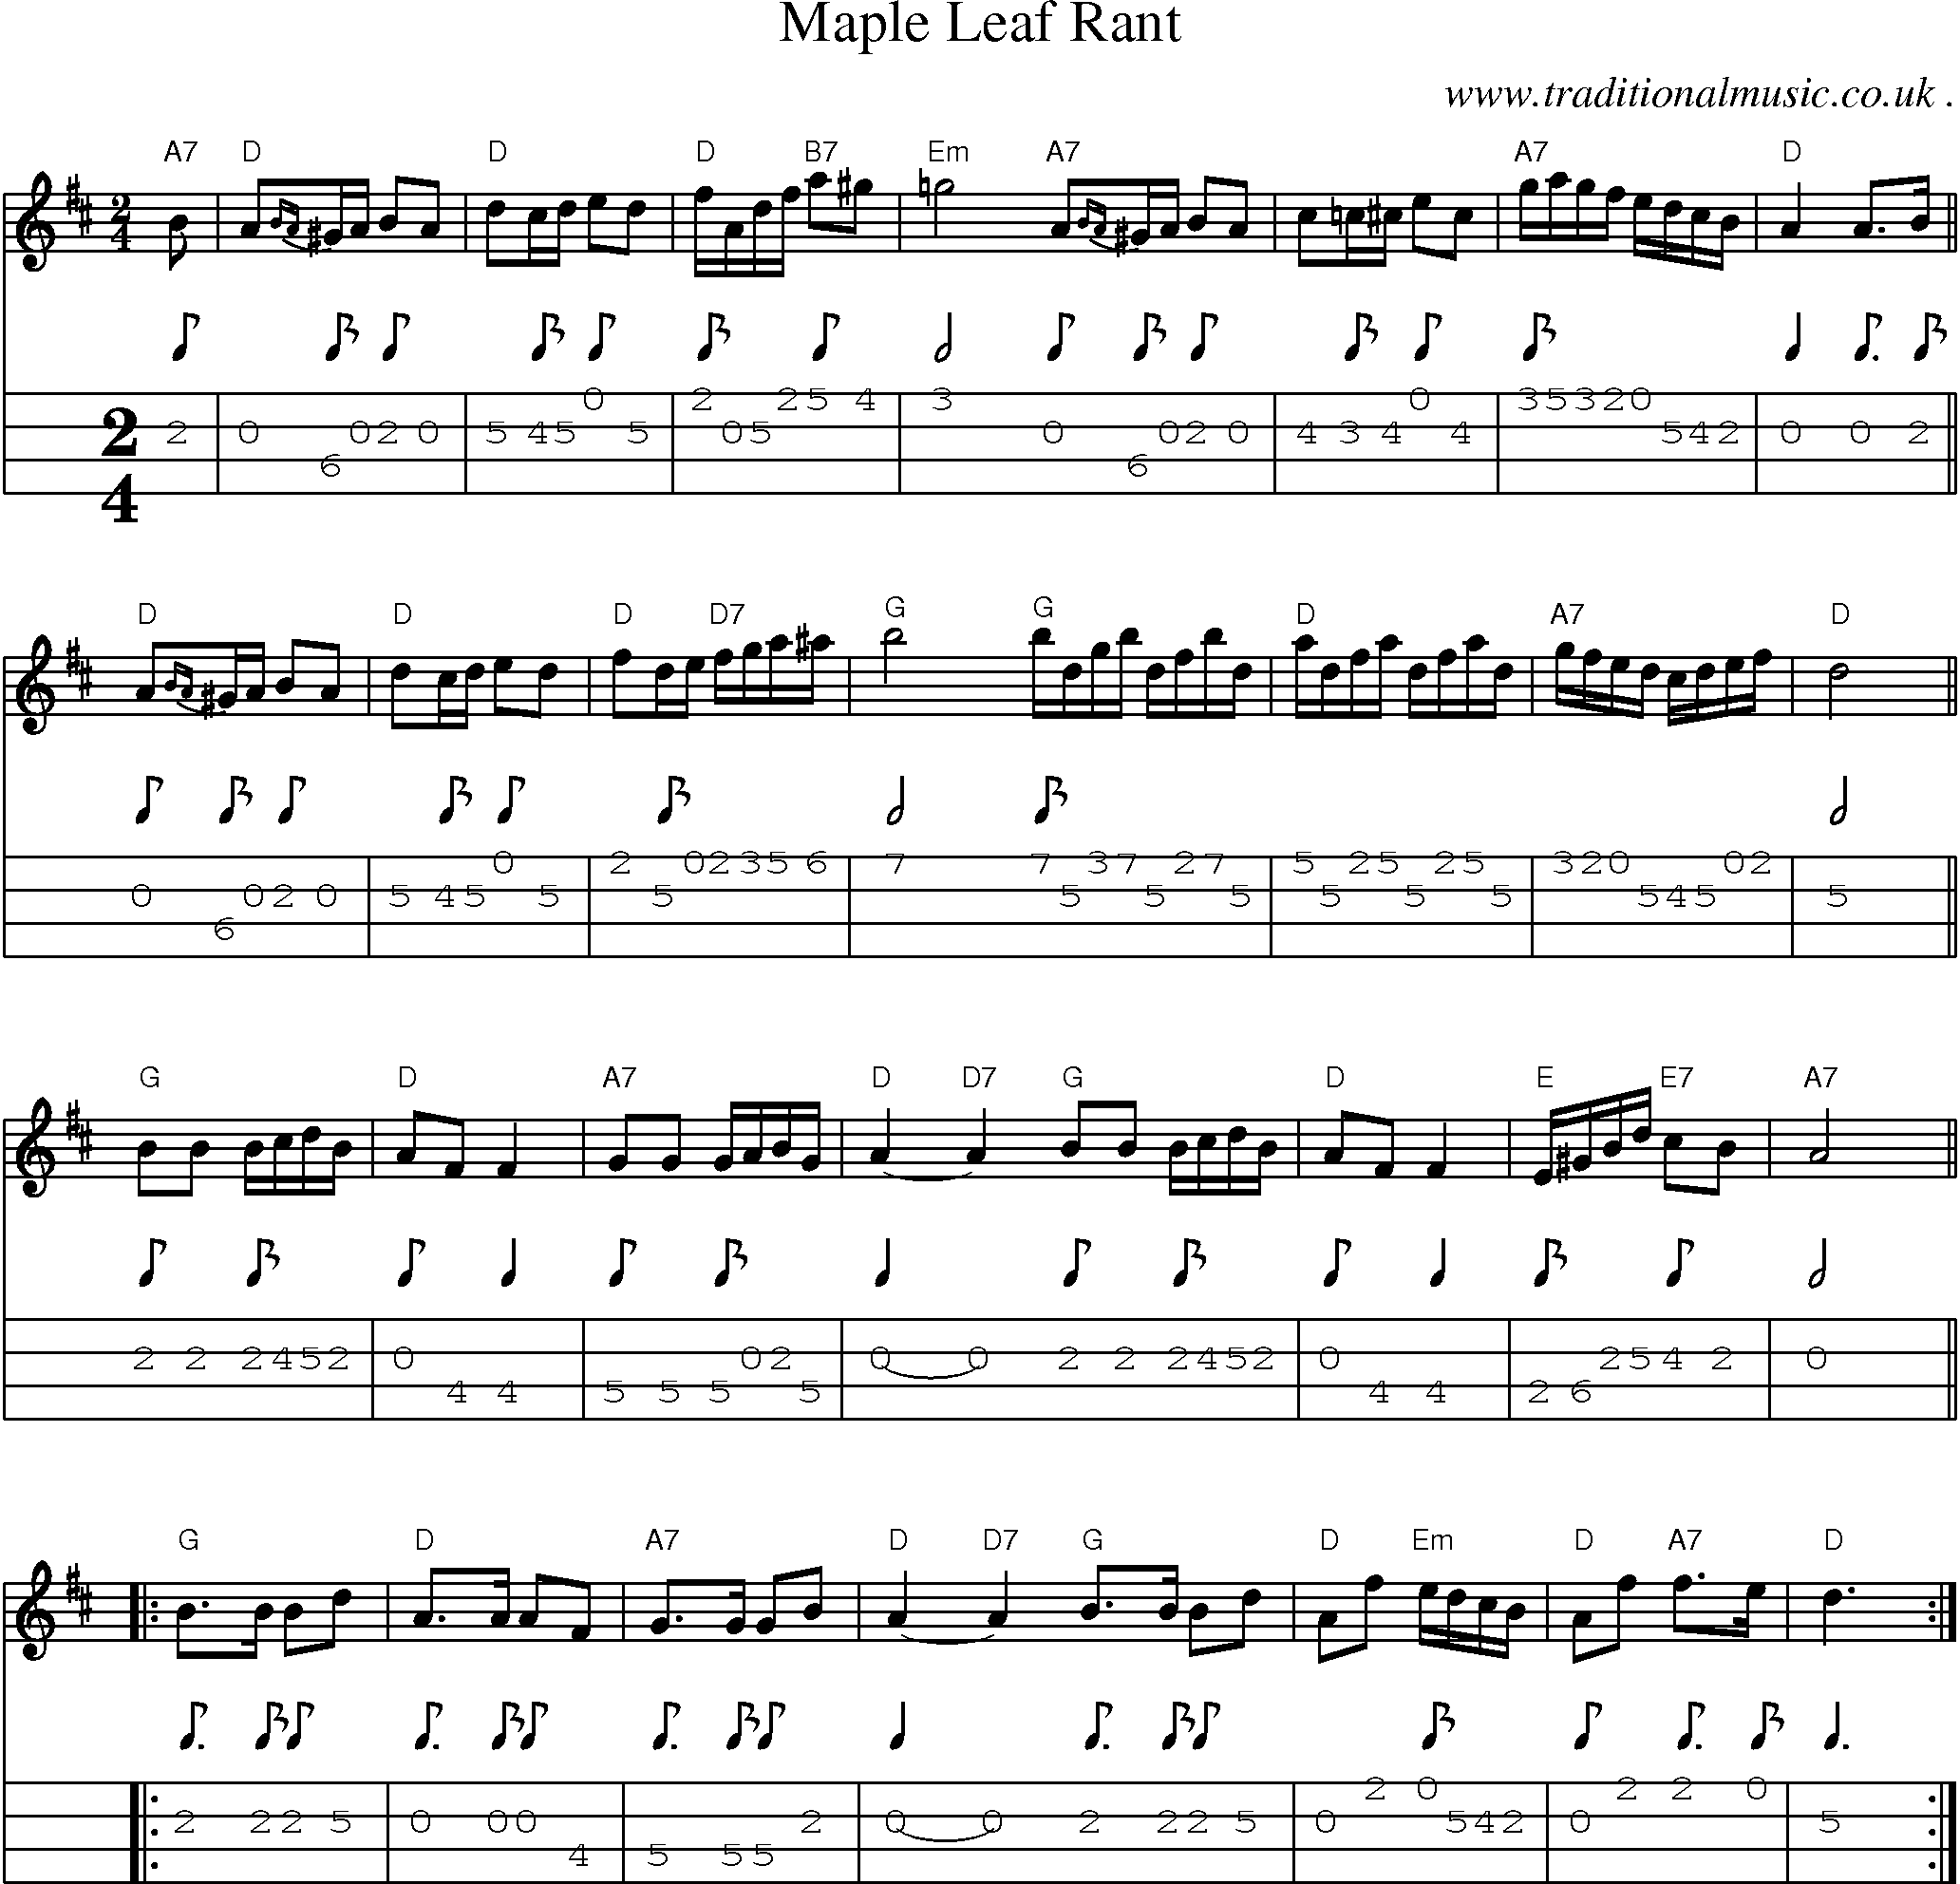 Sheet-music  score, Chords and Mandolin Tabs for Maple Leaf Rant